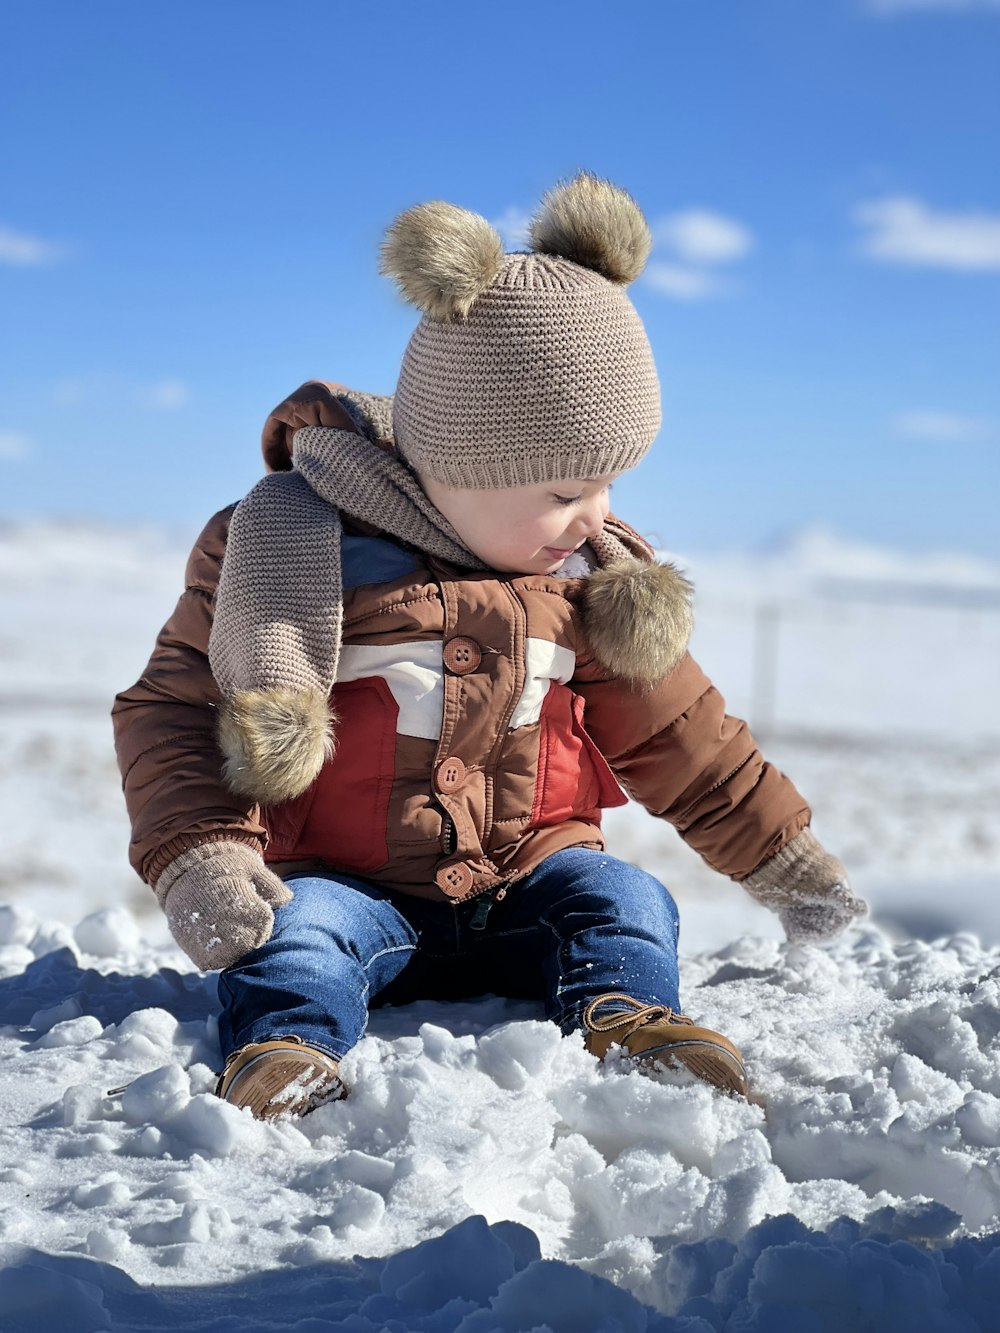 a small child is playing in the snow